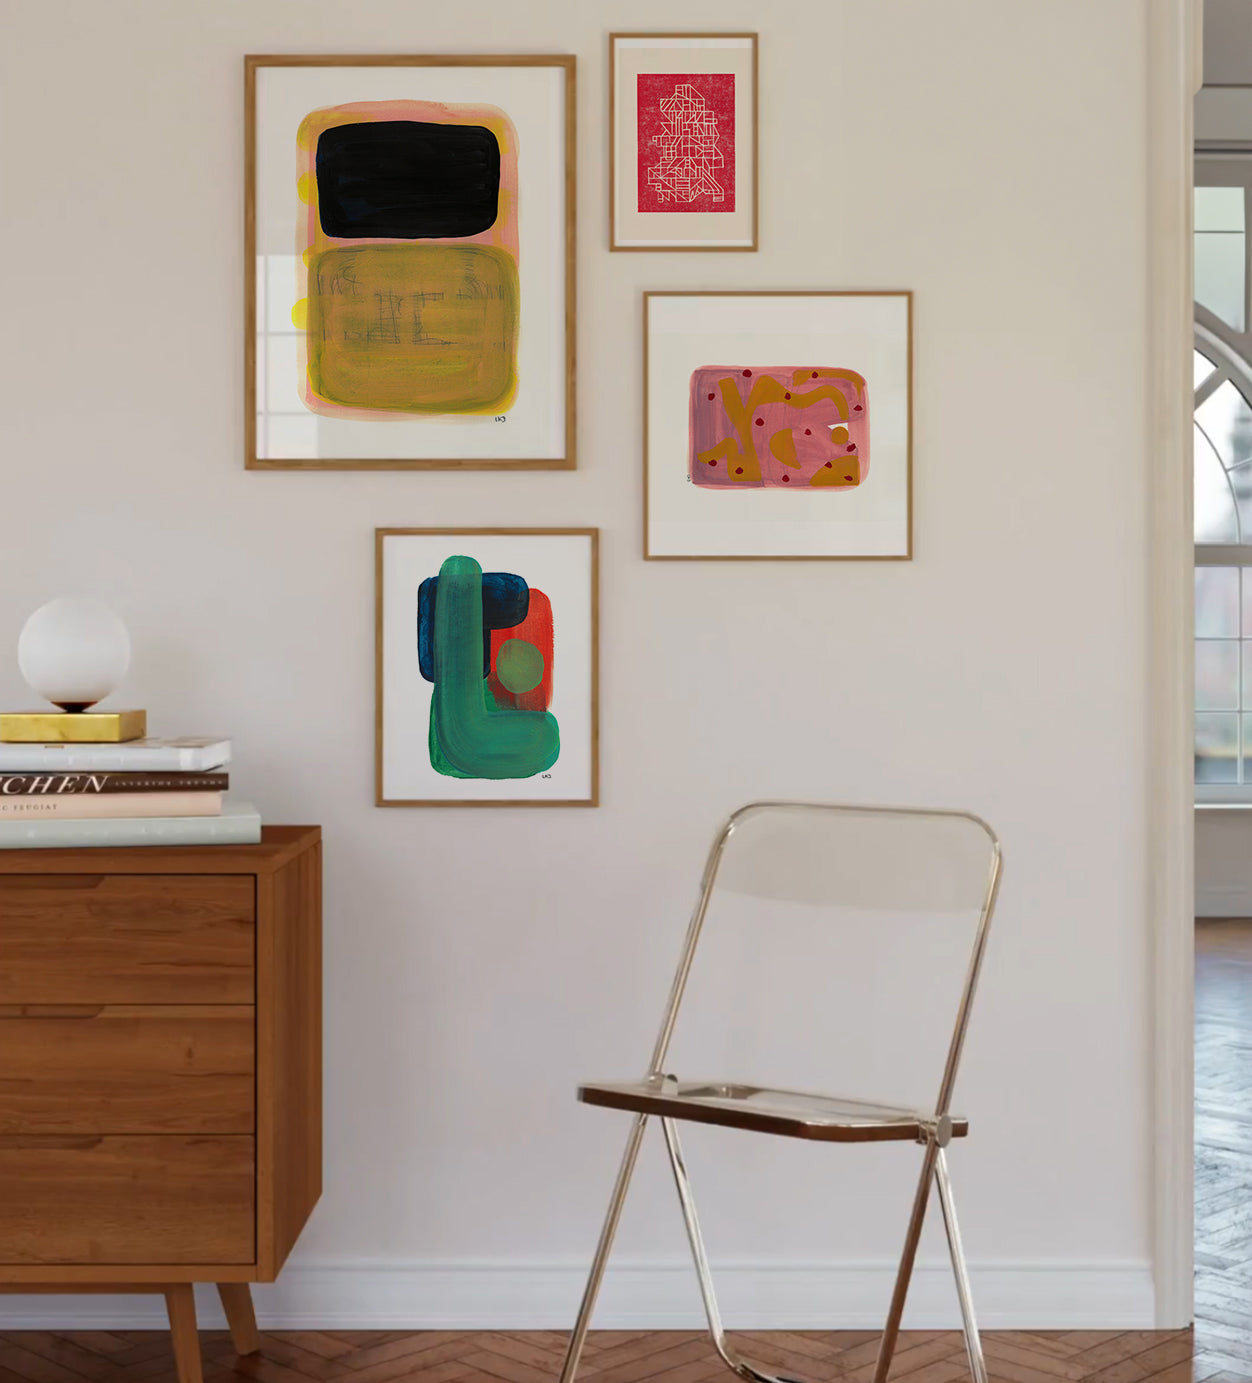 Sunny room with herringbone flooring, showcasing four framed abstract art posters in varying colors and designs. Nearby stands a wooden cabinet with books and a lamp, next to a metal chair."